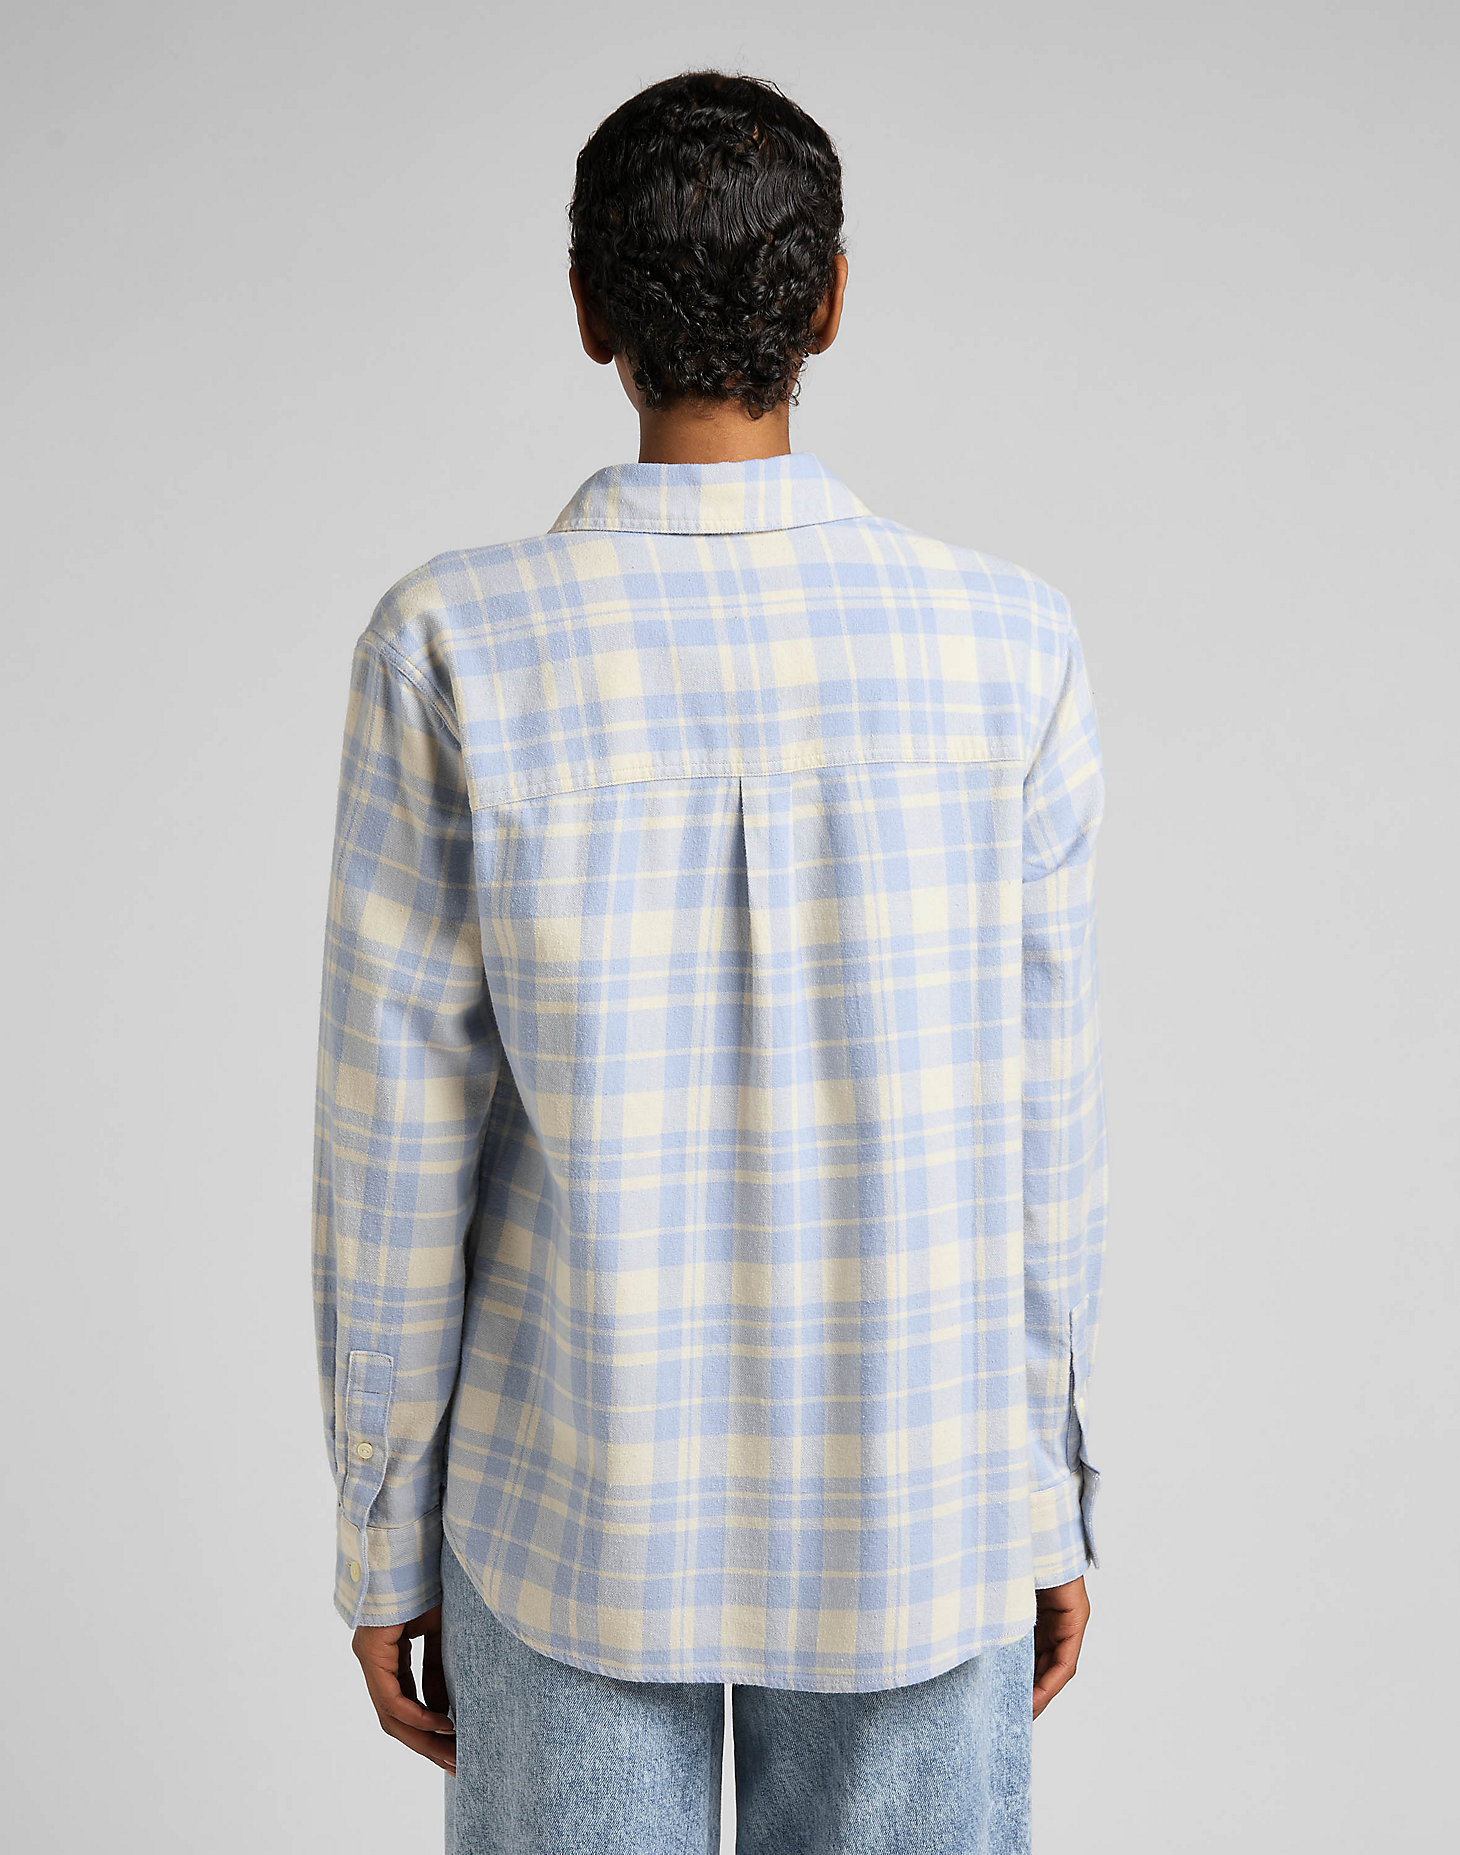 All Purpose Shirt in Parry Blue alternative view 1